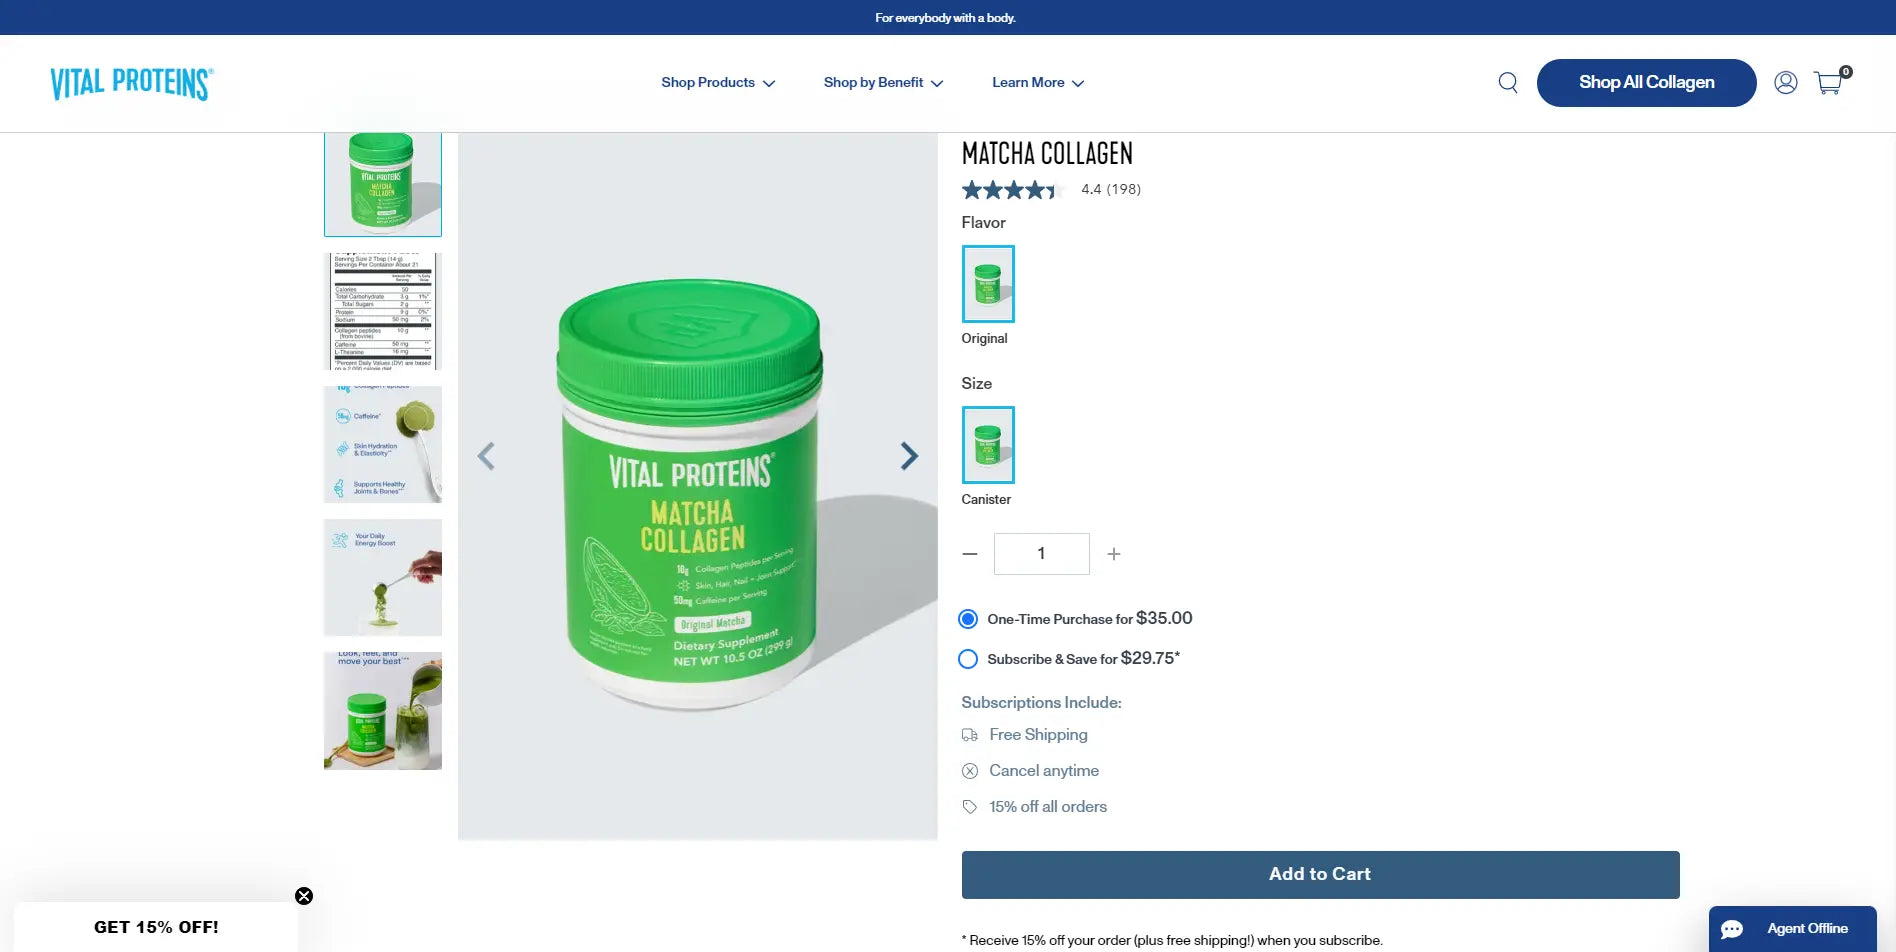 Vital Proteins’s product page